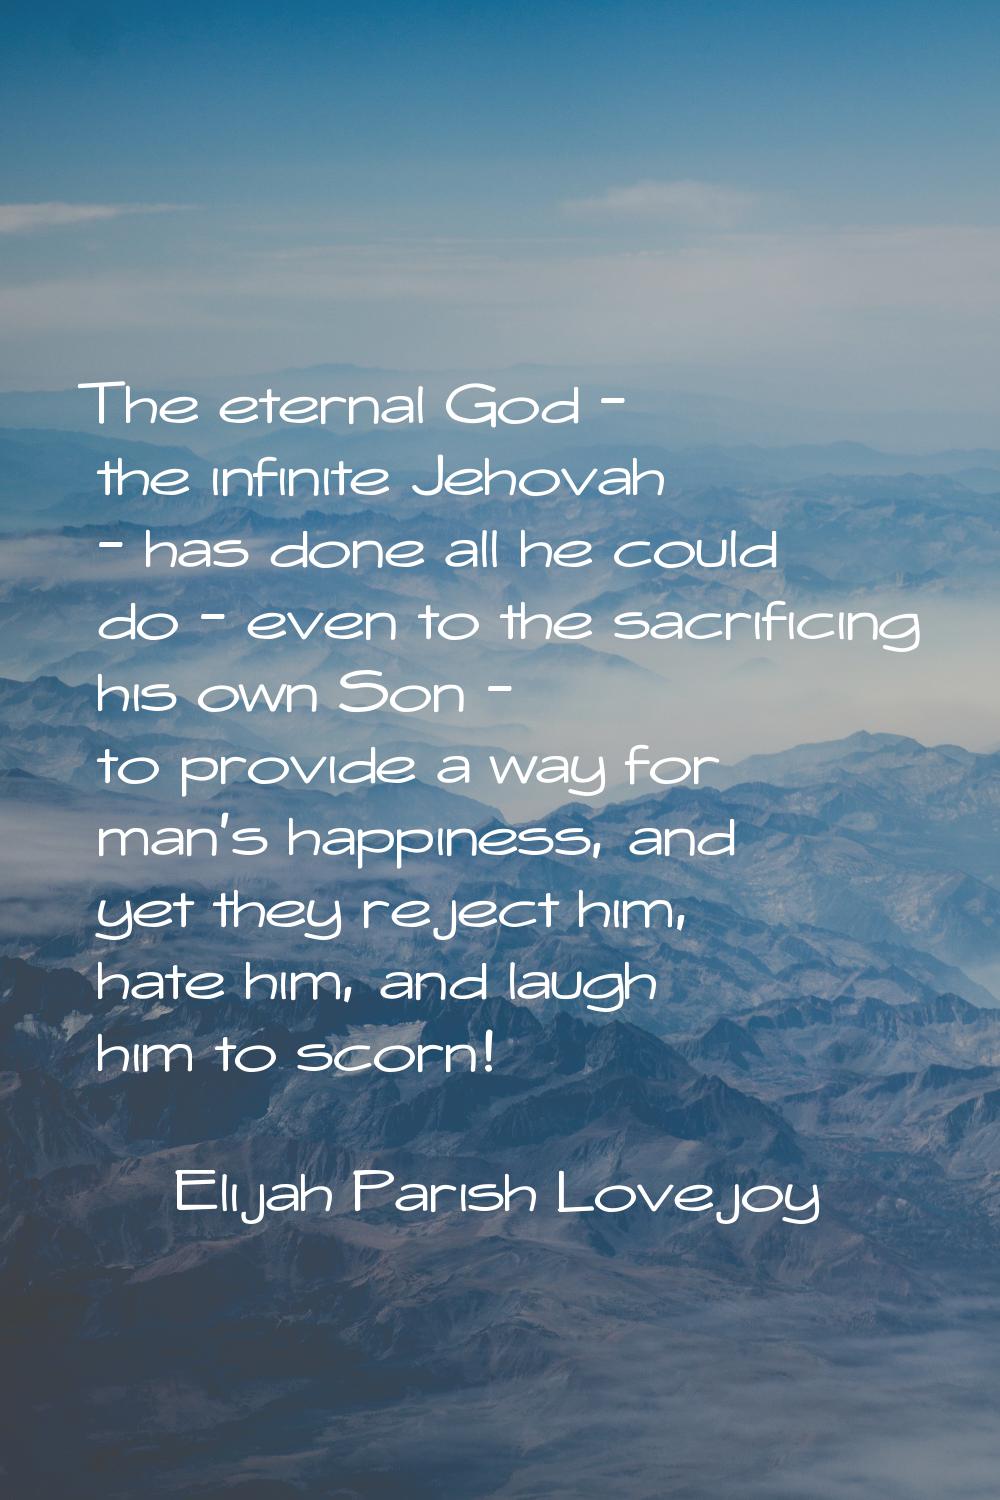 The eternal God - the infinite Jehovah - has done all he could do - even to the sacrificing his own